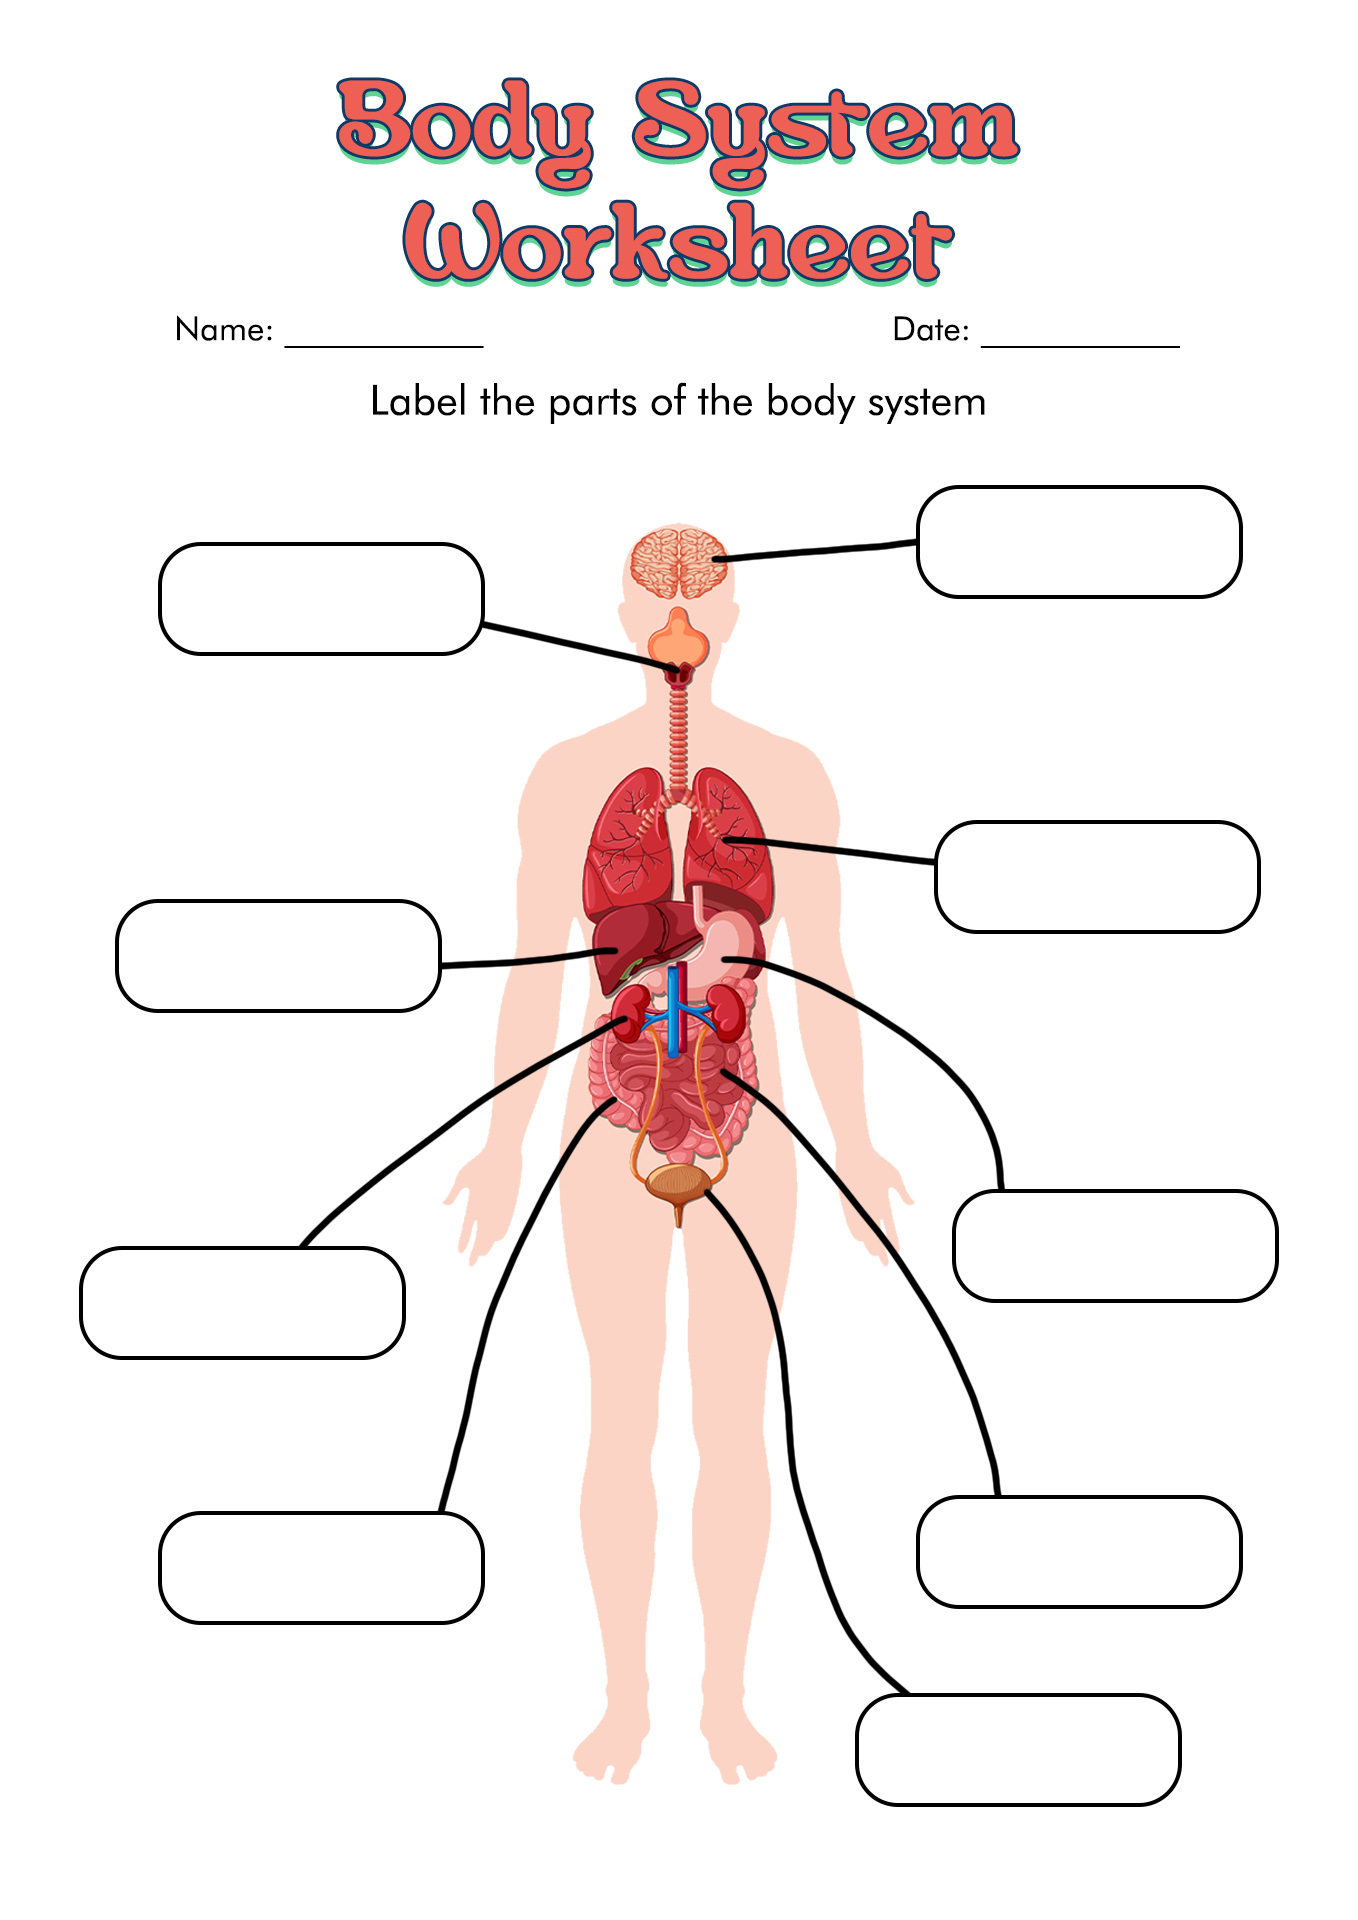 Human Body Systems Worksheets Image